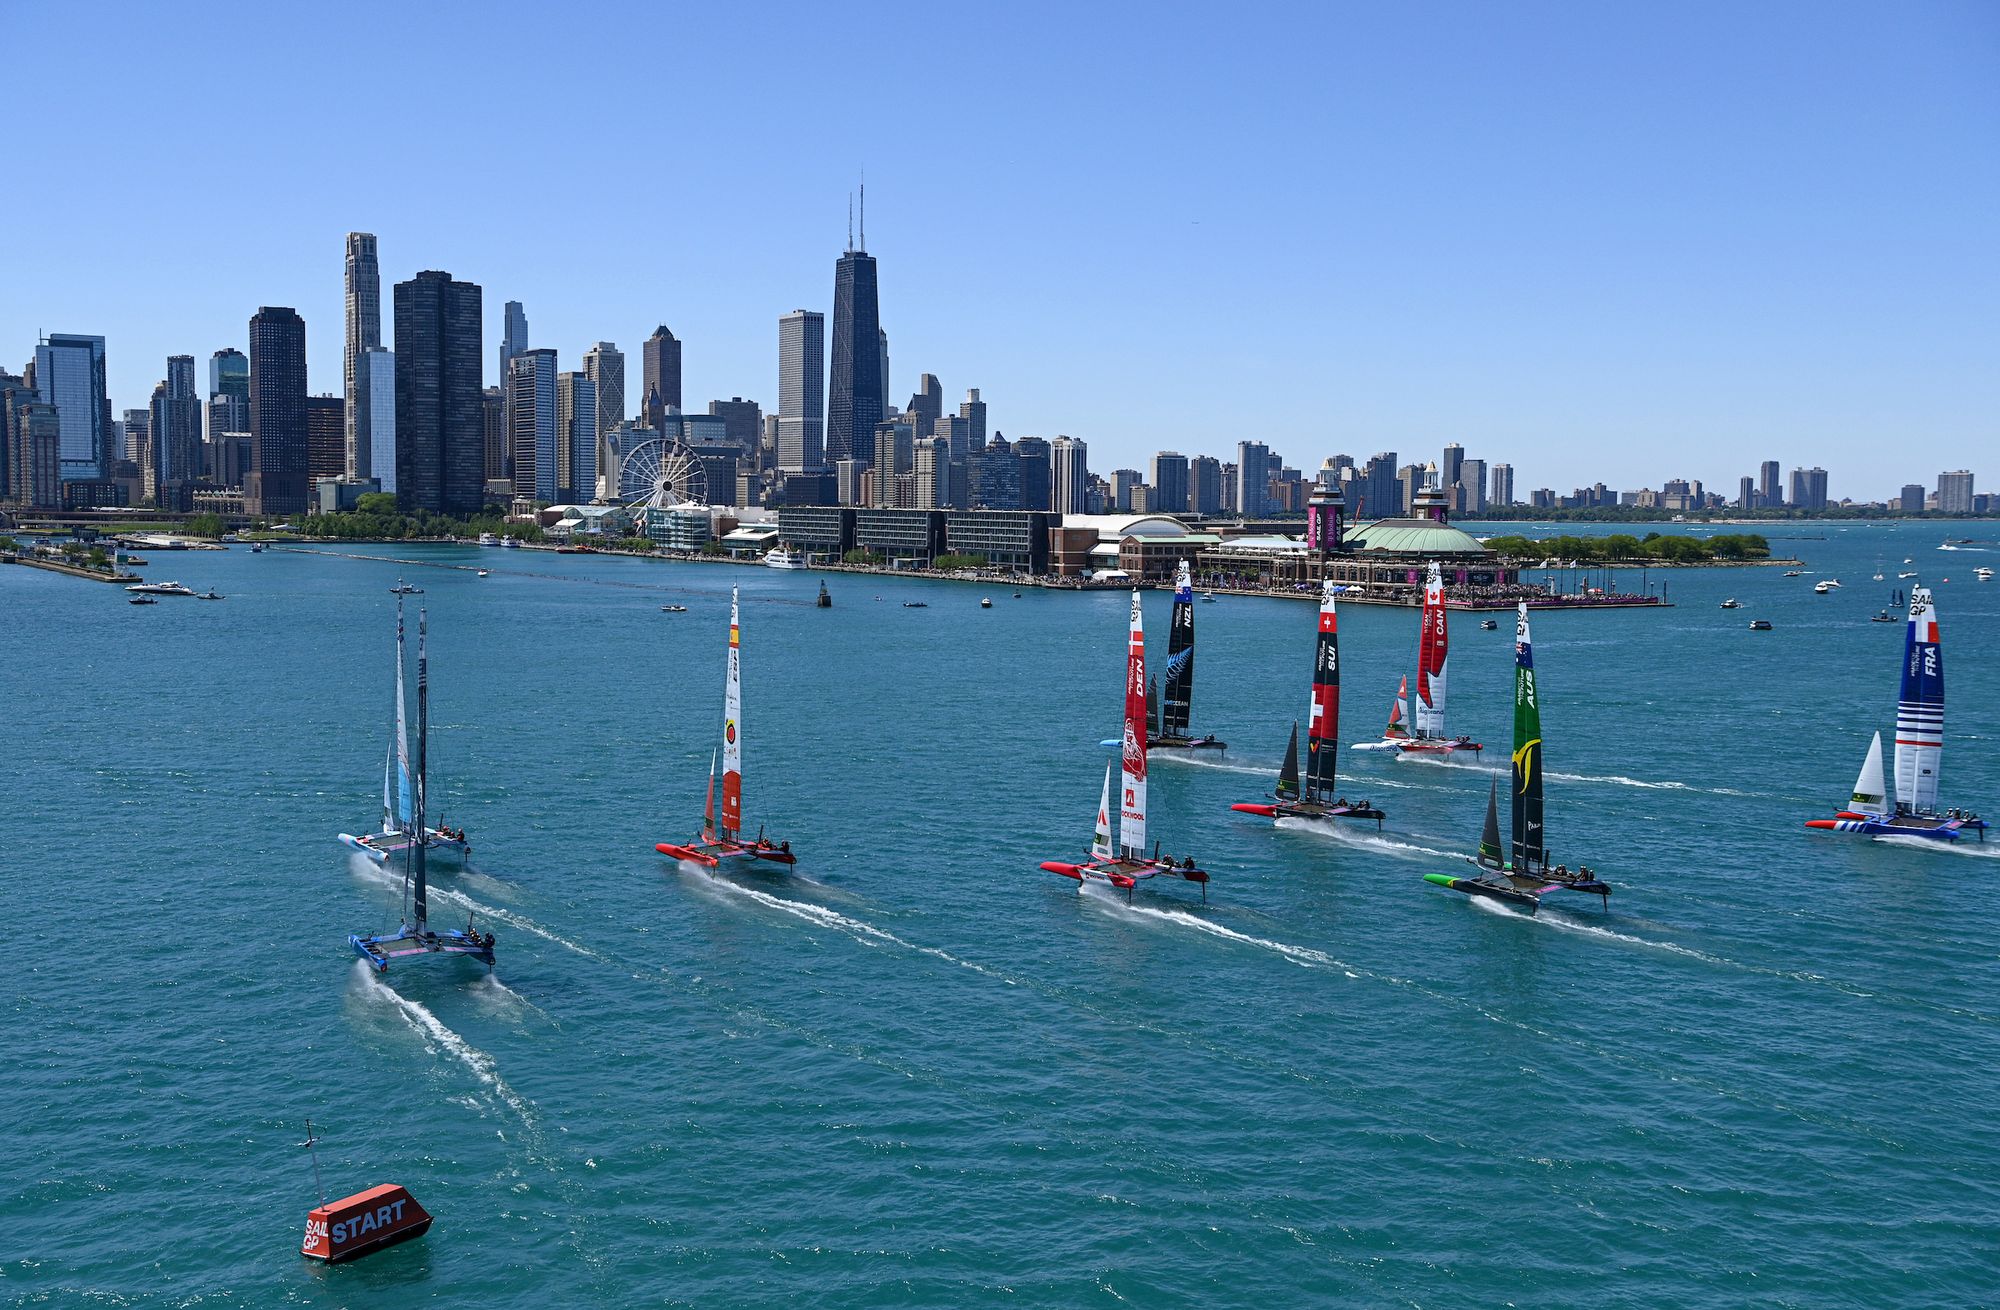 Wind blows Canada's way in SailGP Chicago while US struggles